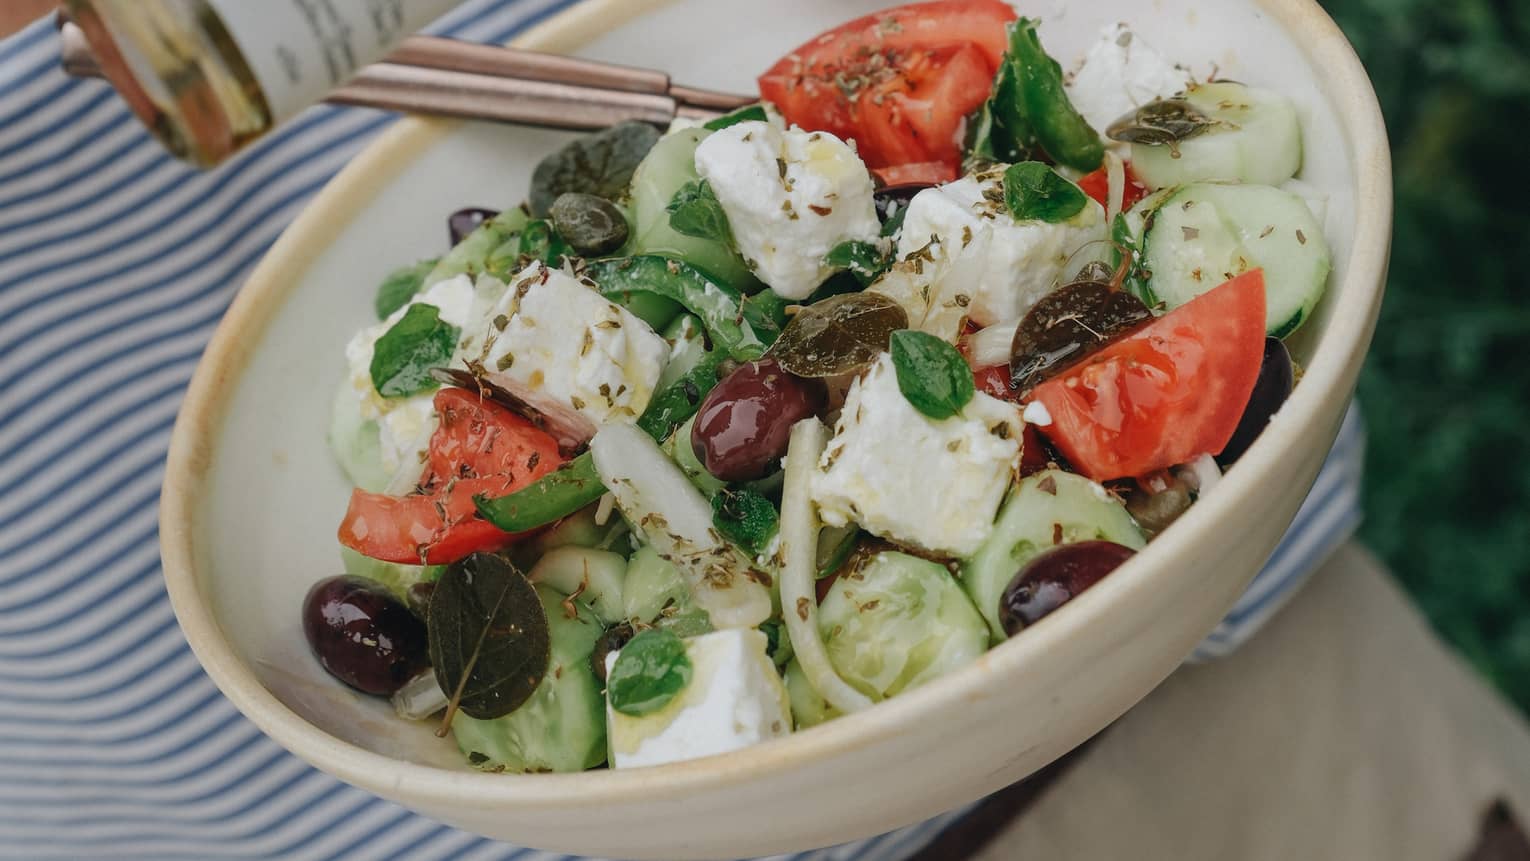 Greek Salad with Feta Cubes, Tomato Wedges, Cucumber Rounds, Onion Slices and Black and Kalamata Olives